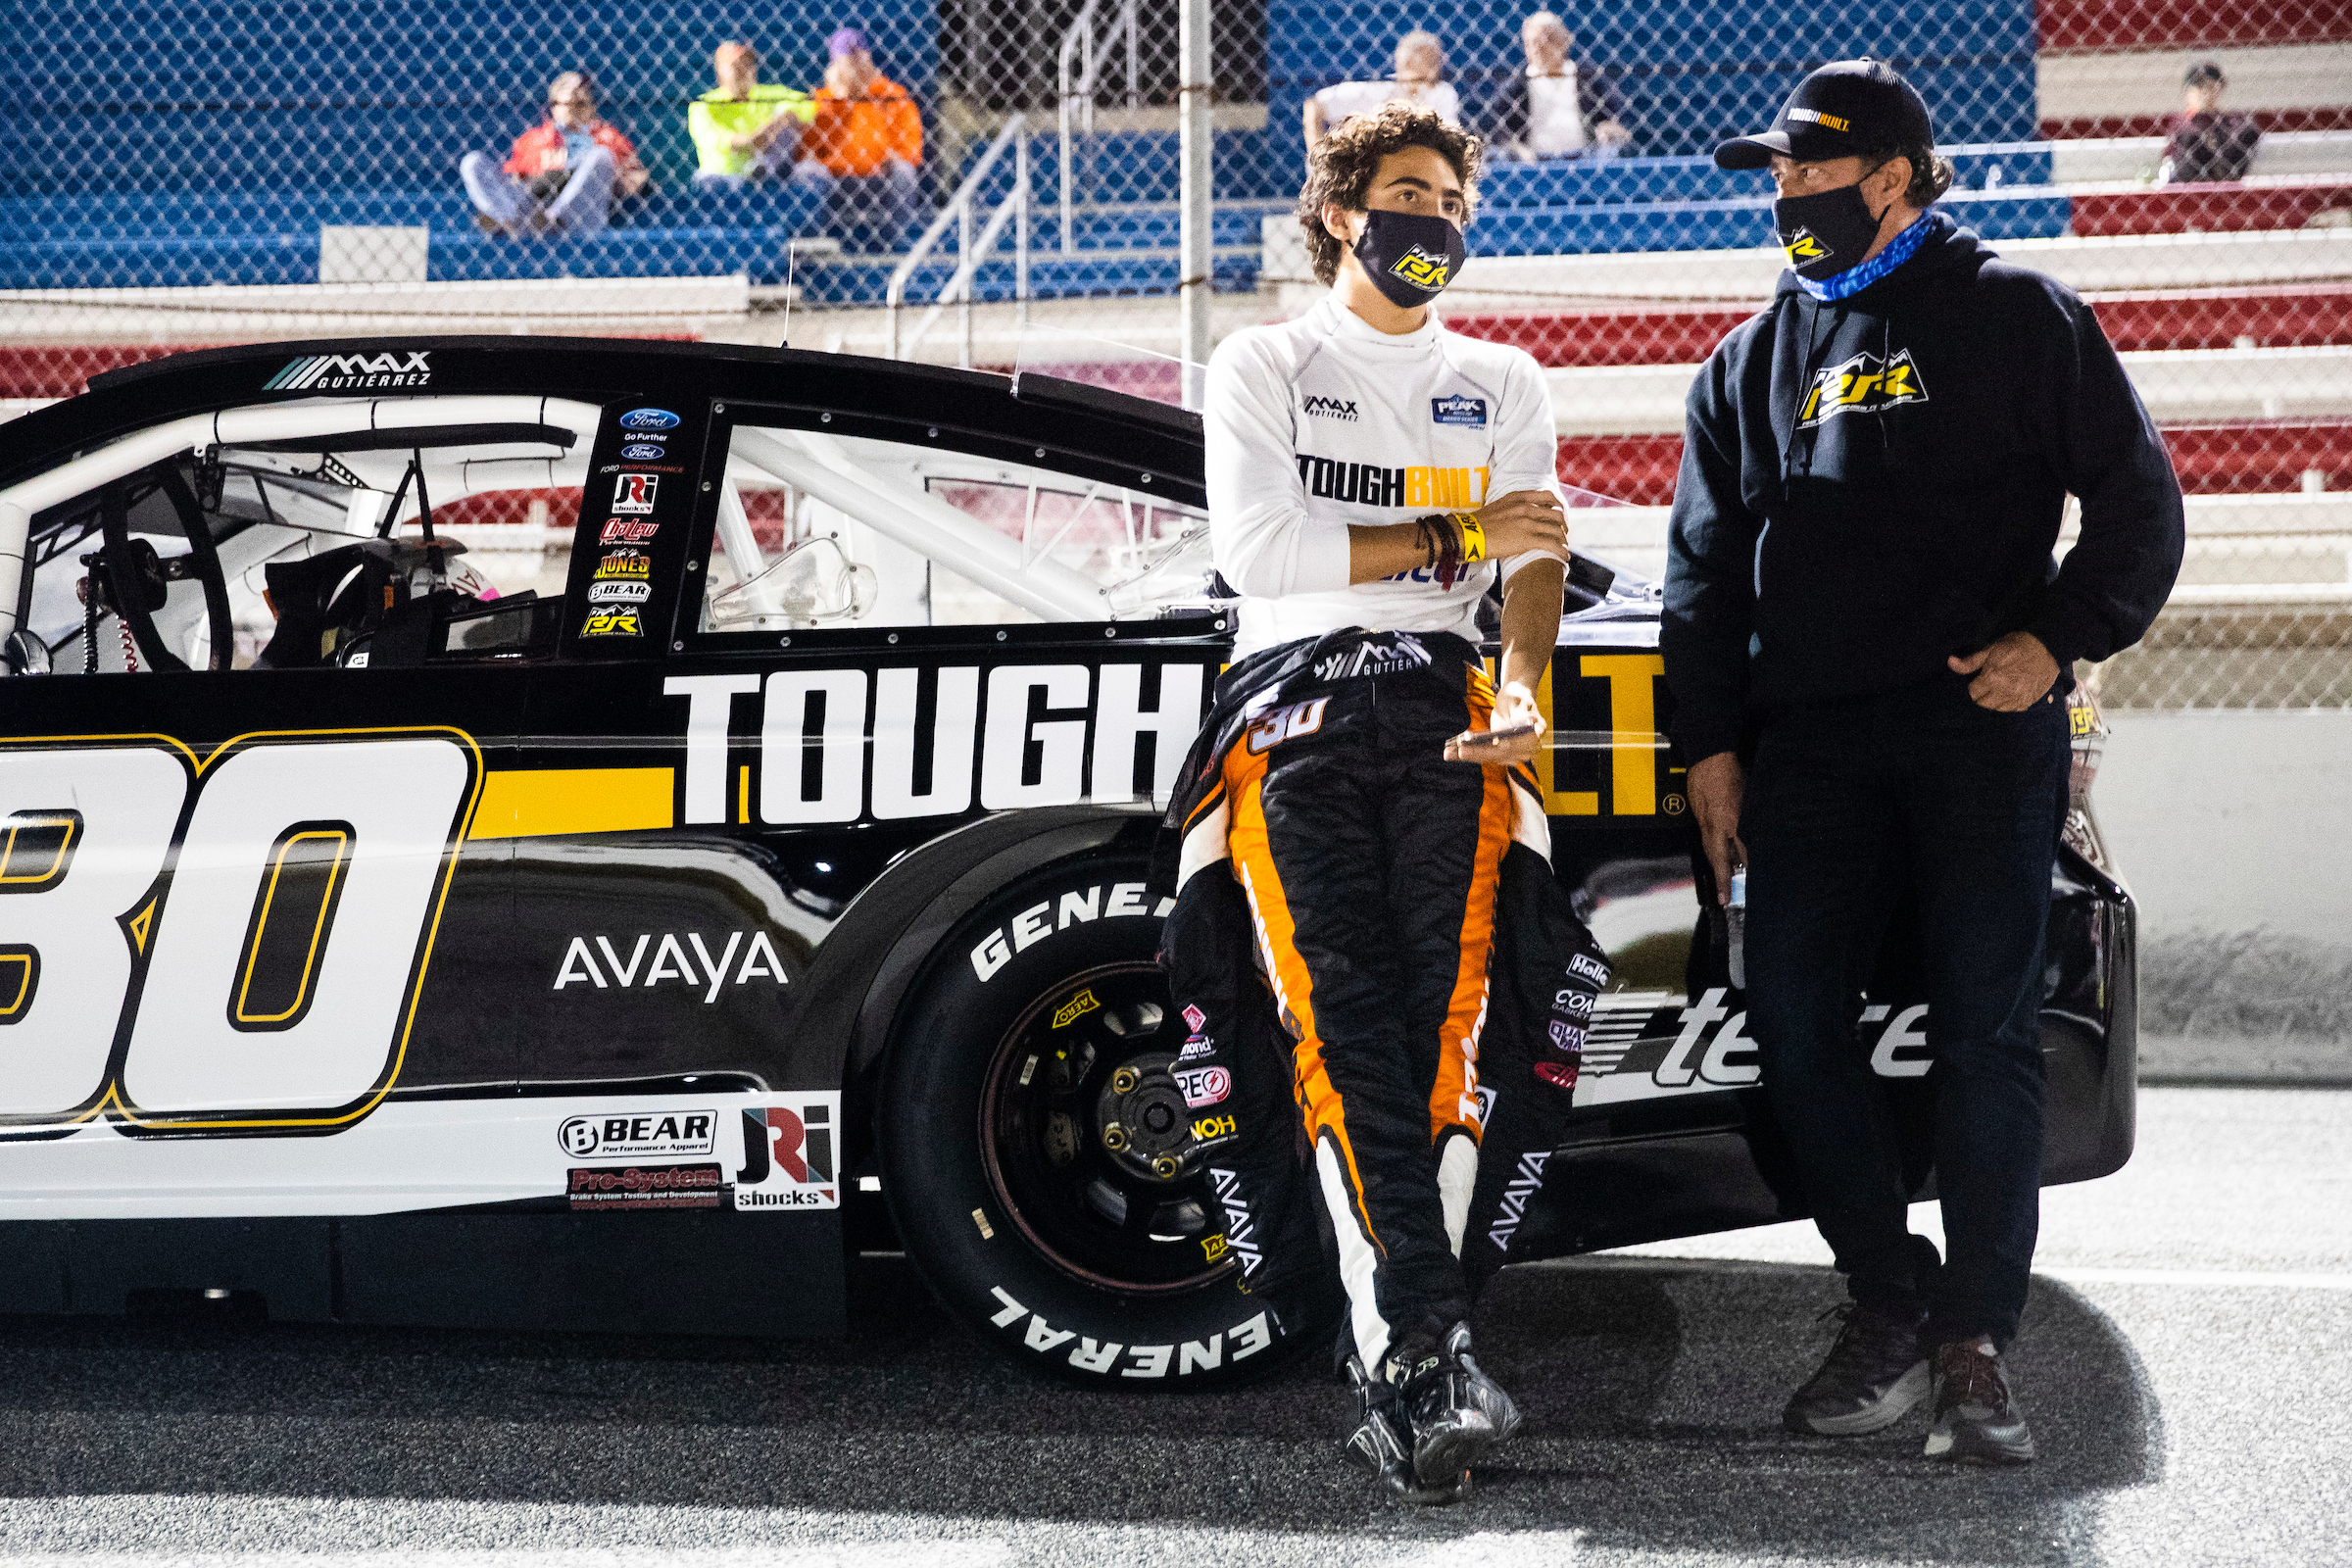 Mexico City’s Max Gutierrez Looks for Two-in-a-Row to Start 2021 at Five Flags Speedway